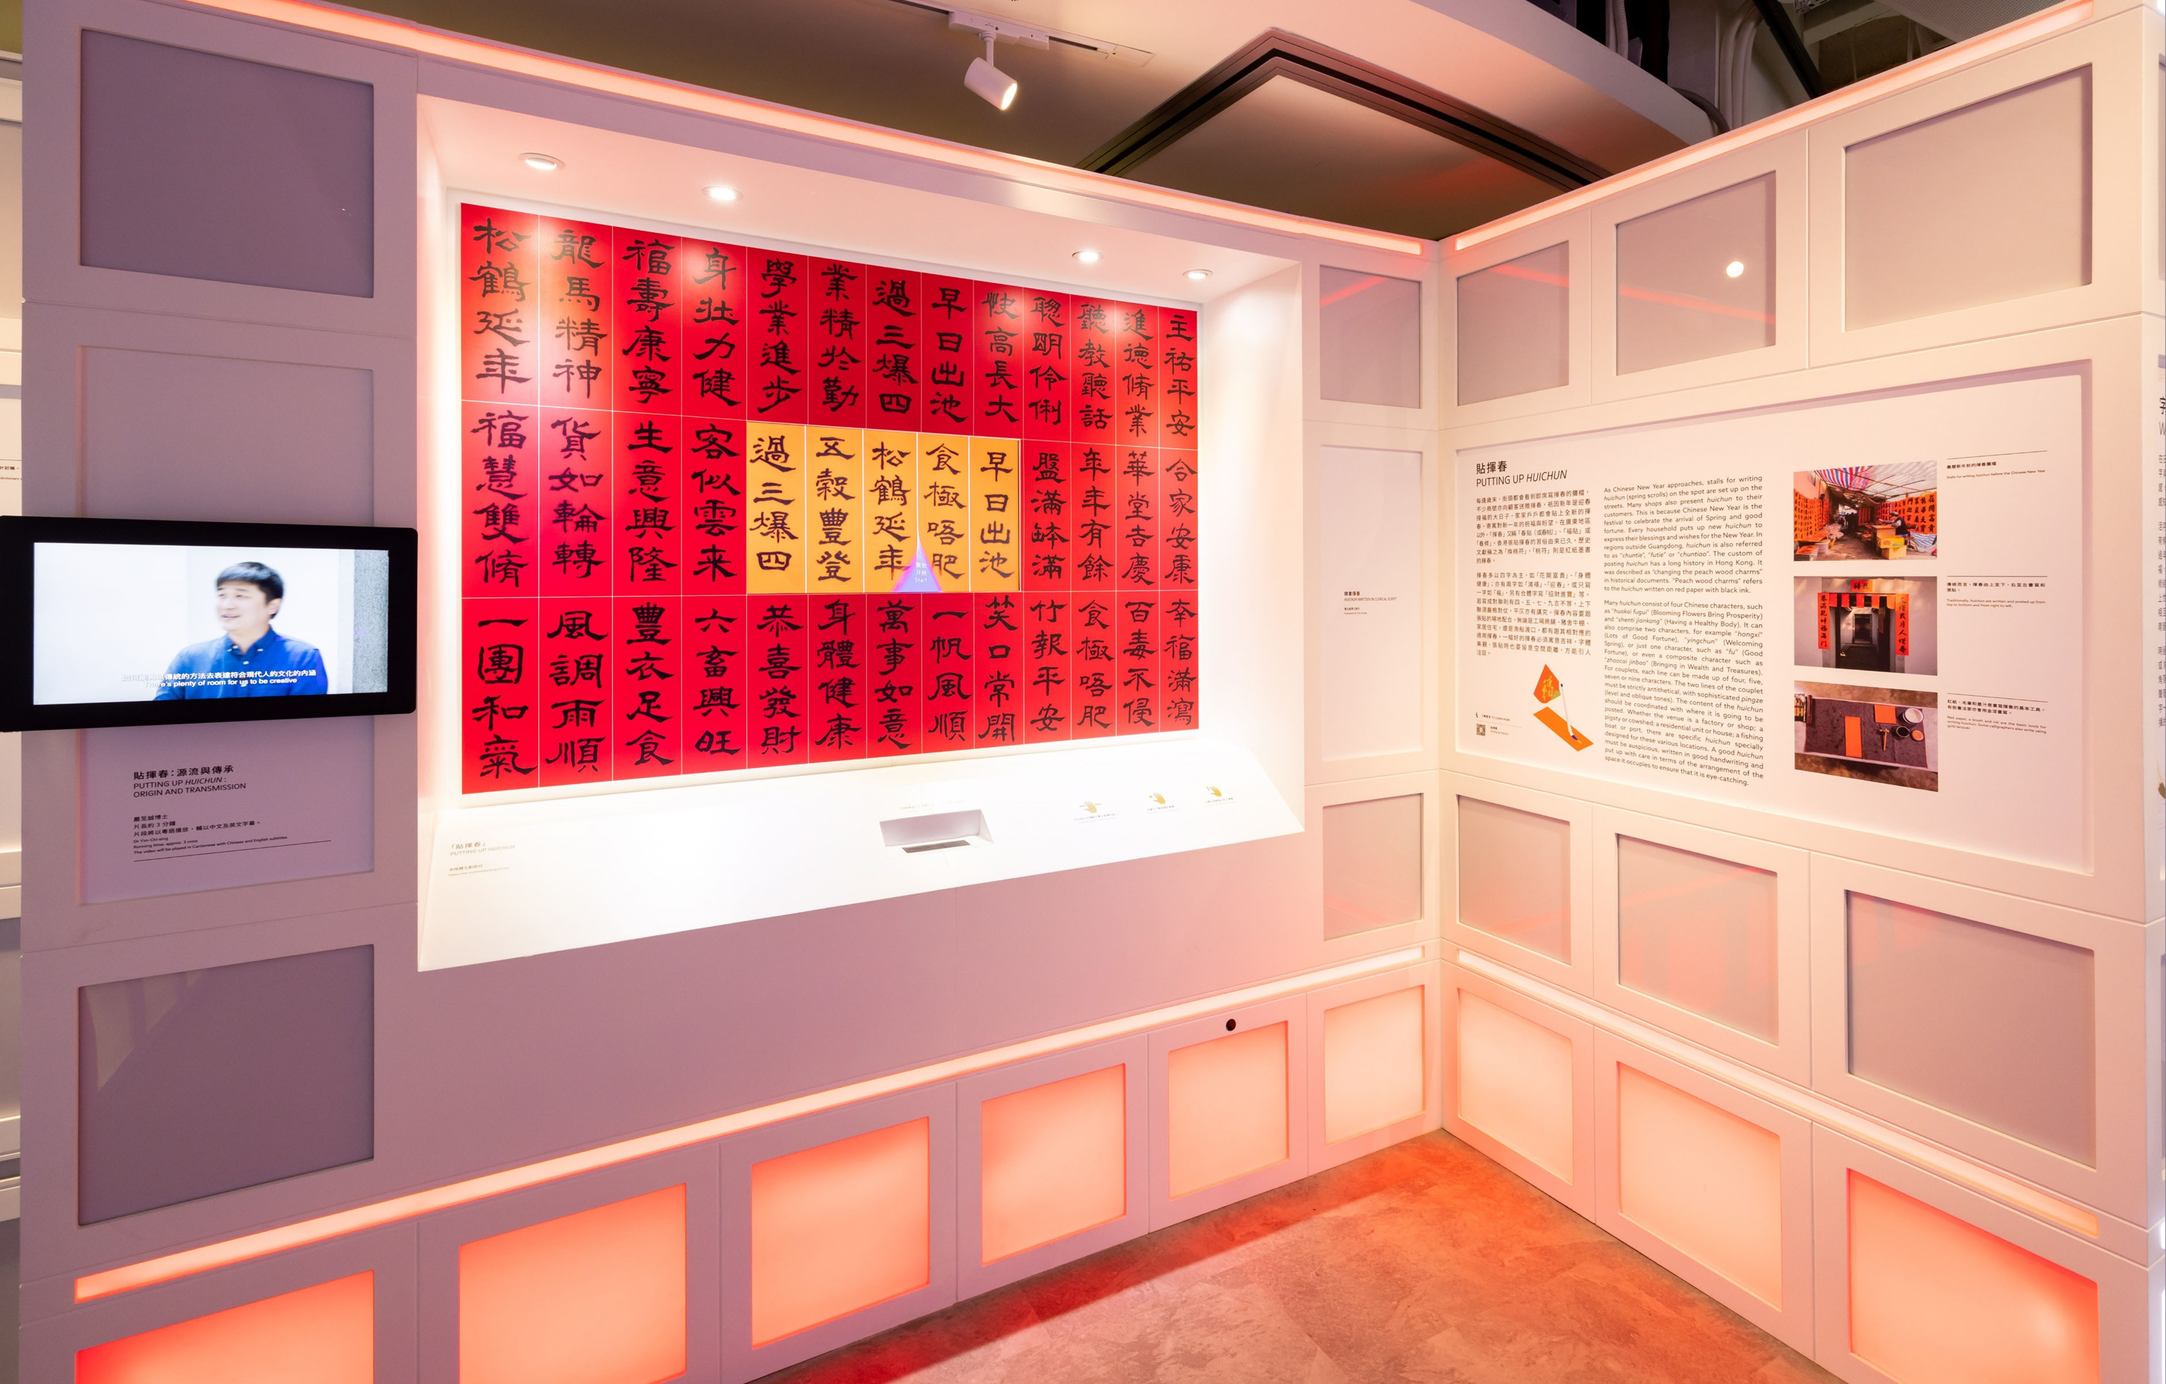 Traces of Human Touch — Hong Kong Intangible Cultural Heritage Exhibition